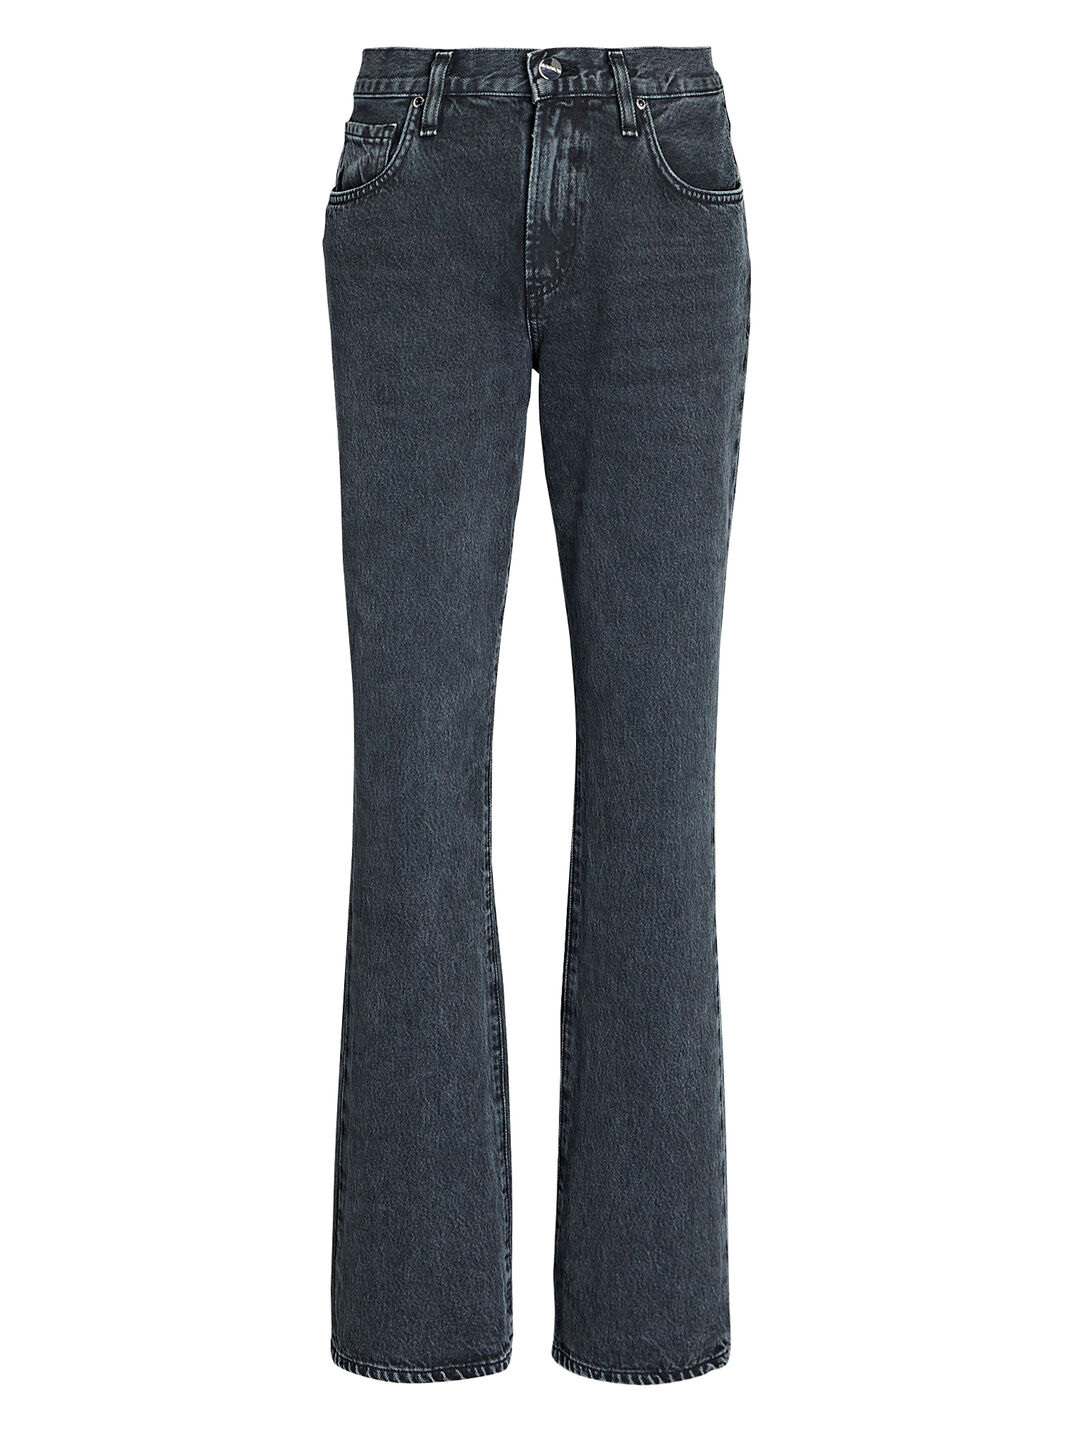 The Stratton Organic Bootcut Jeans